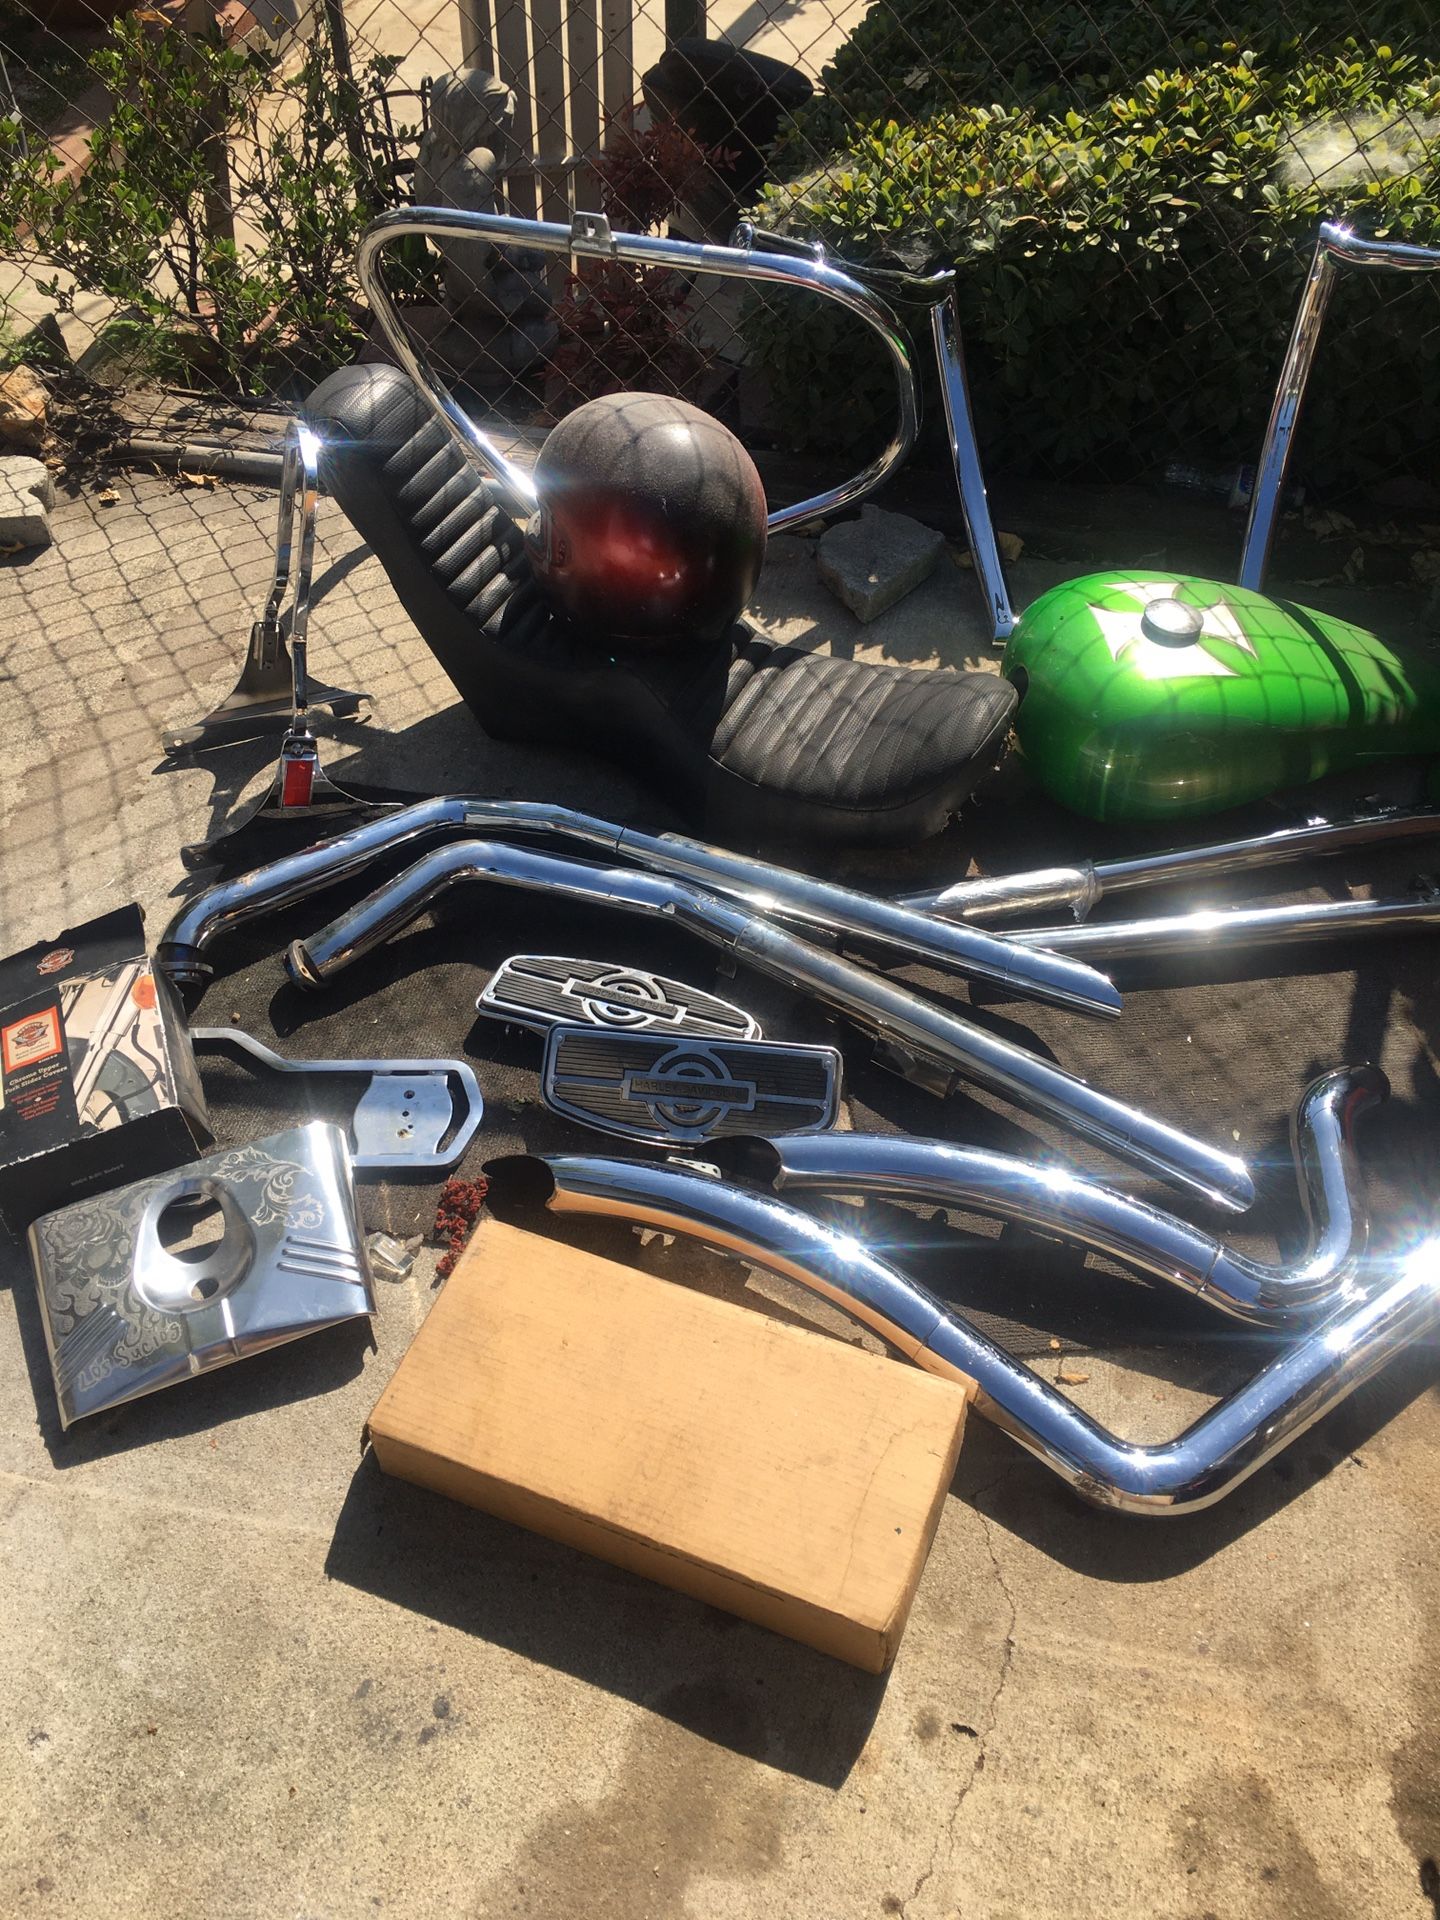 All Harley Davidson parts Vance & Hines pipes all 250 take all